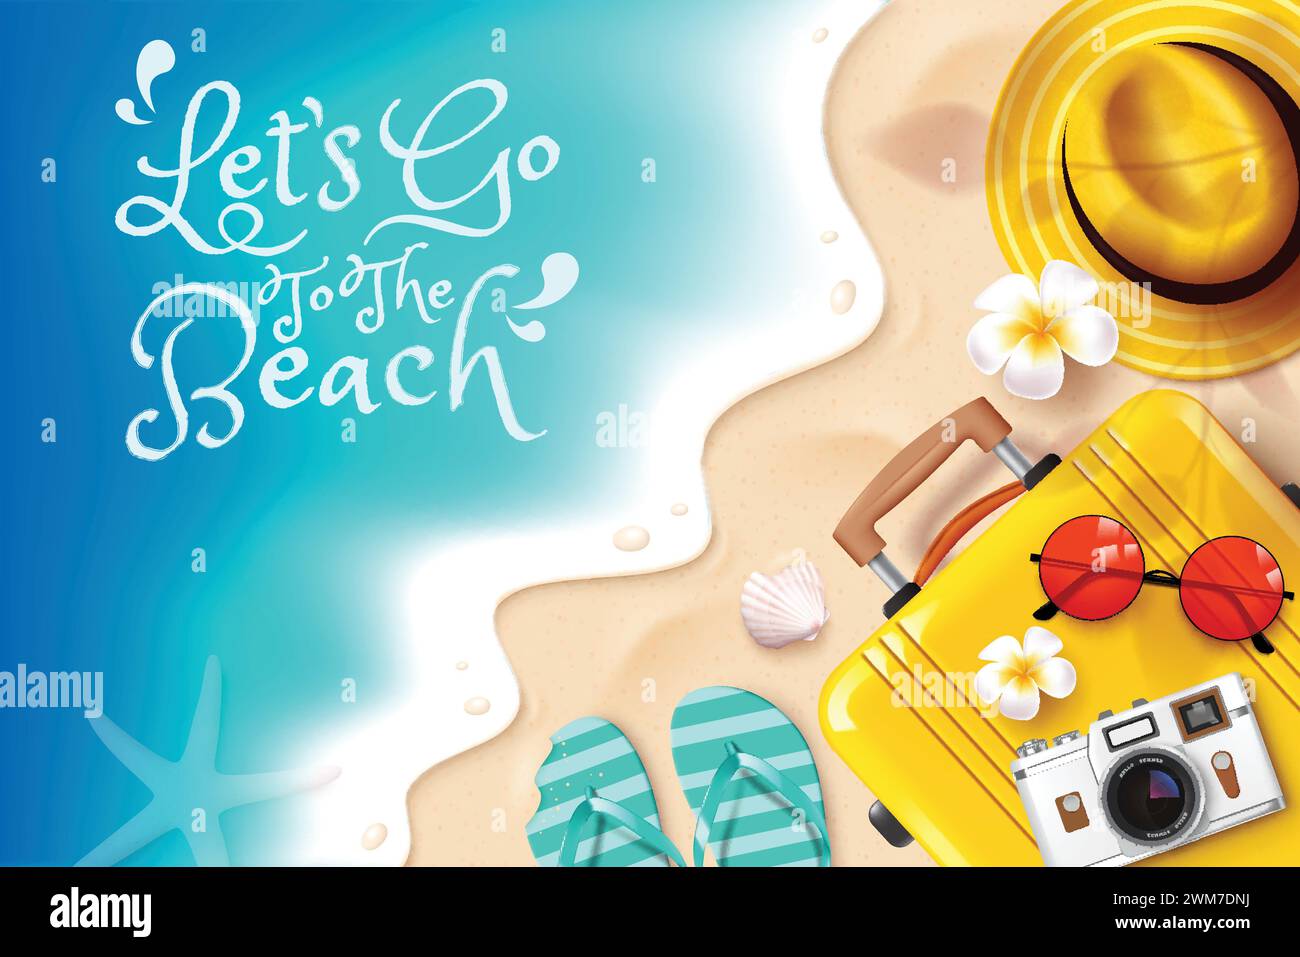 Summer beach vector design. Let's go to the beach greeting text with luggage, hat, flipflop, sunglasses and camera elements in sea shore background Stock Vector